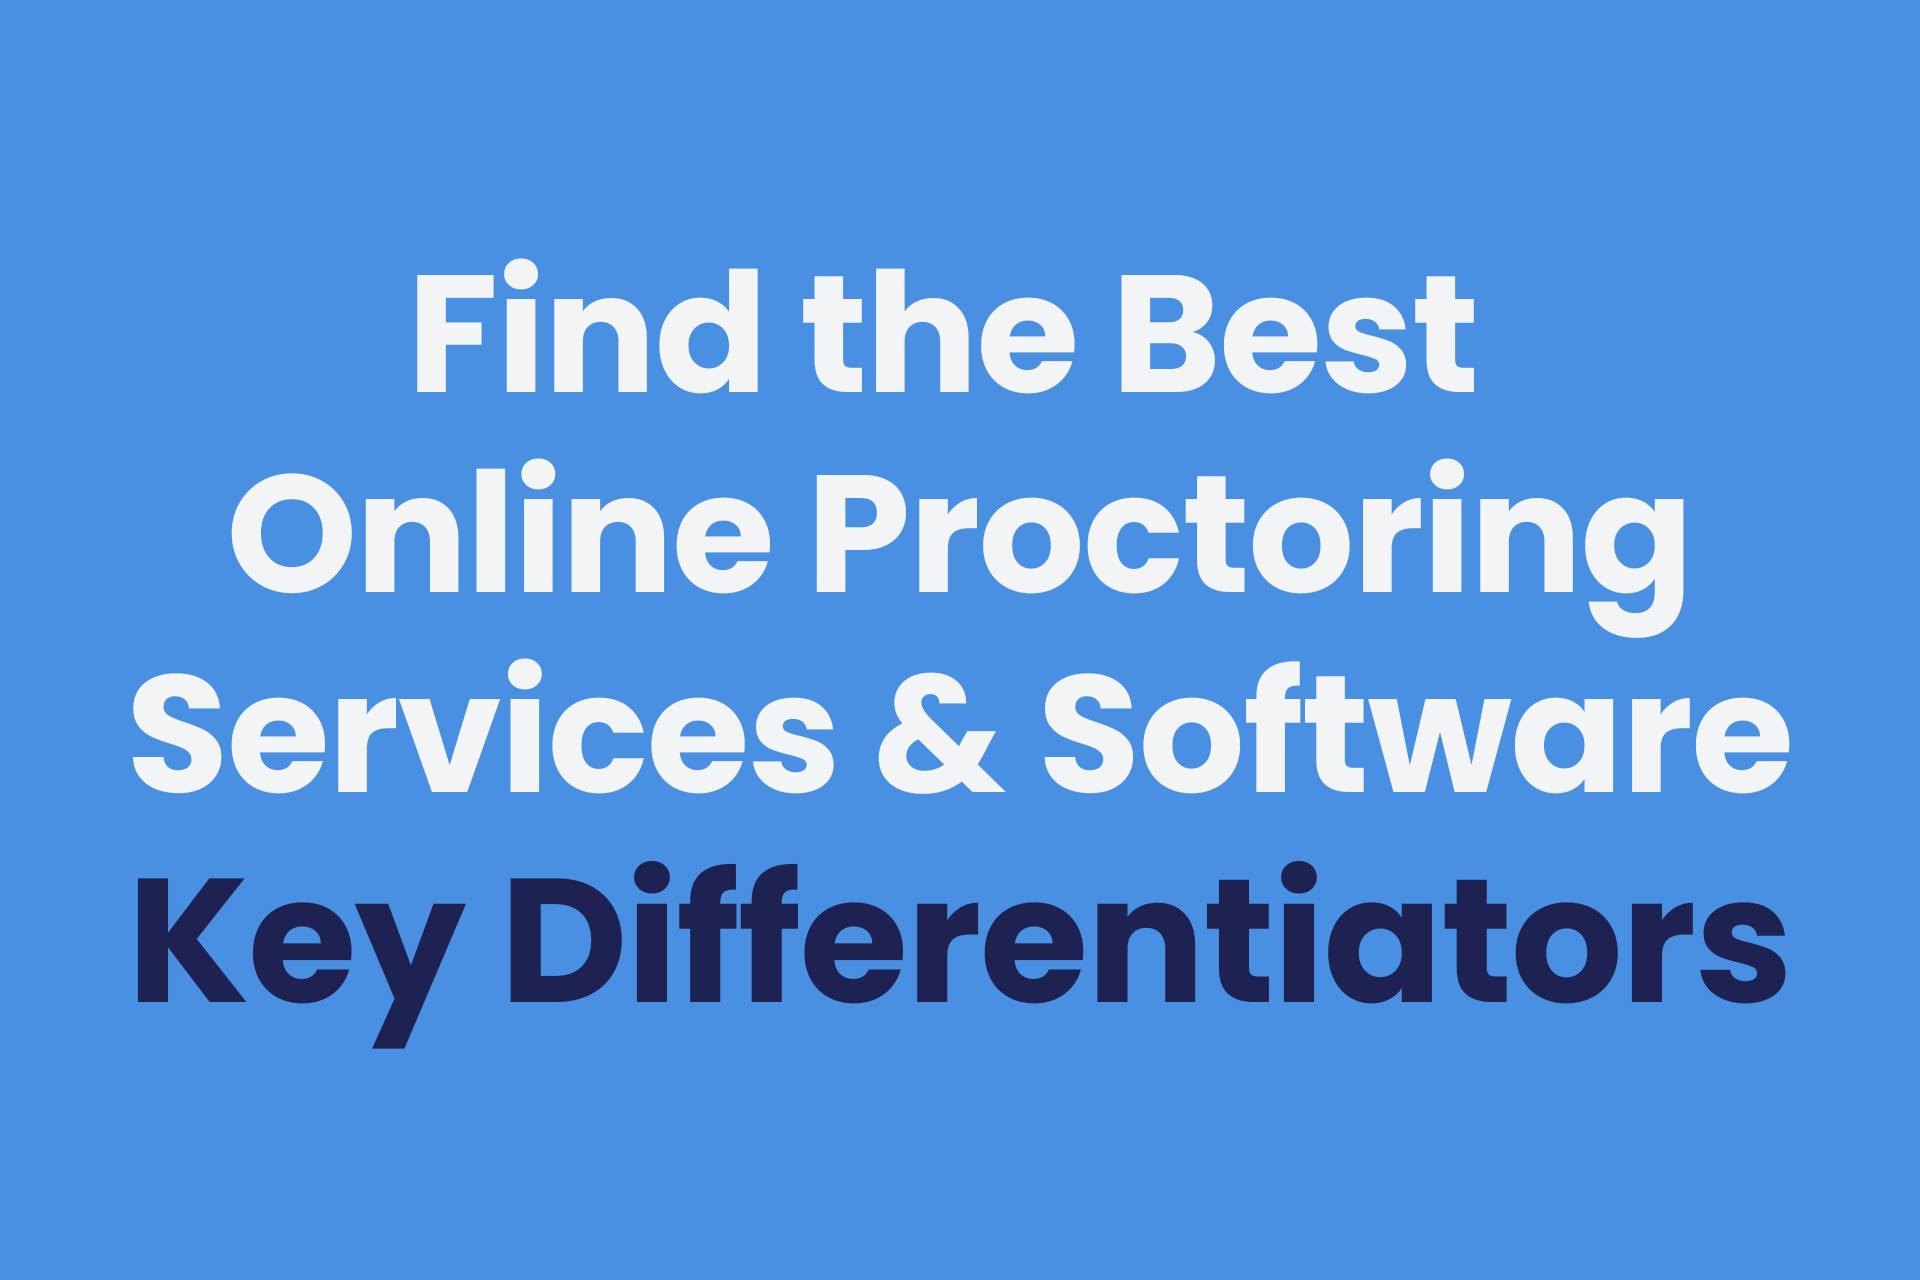 Compare platform software and services of the best online proctoring companies